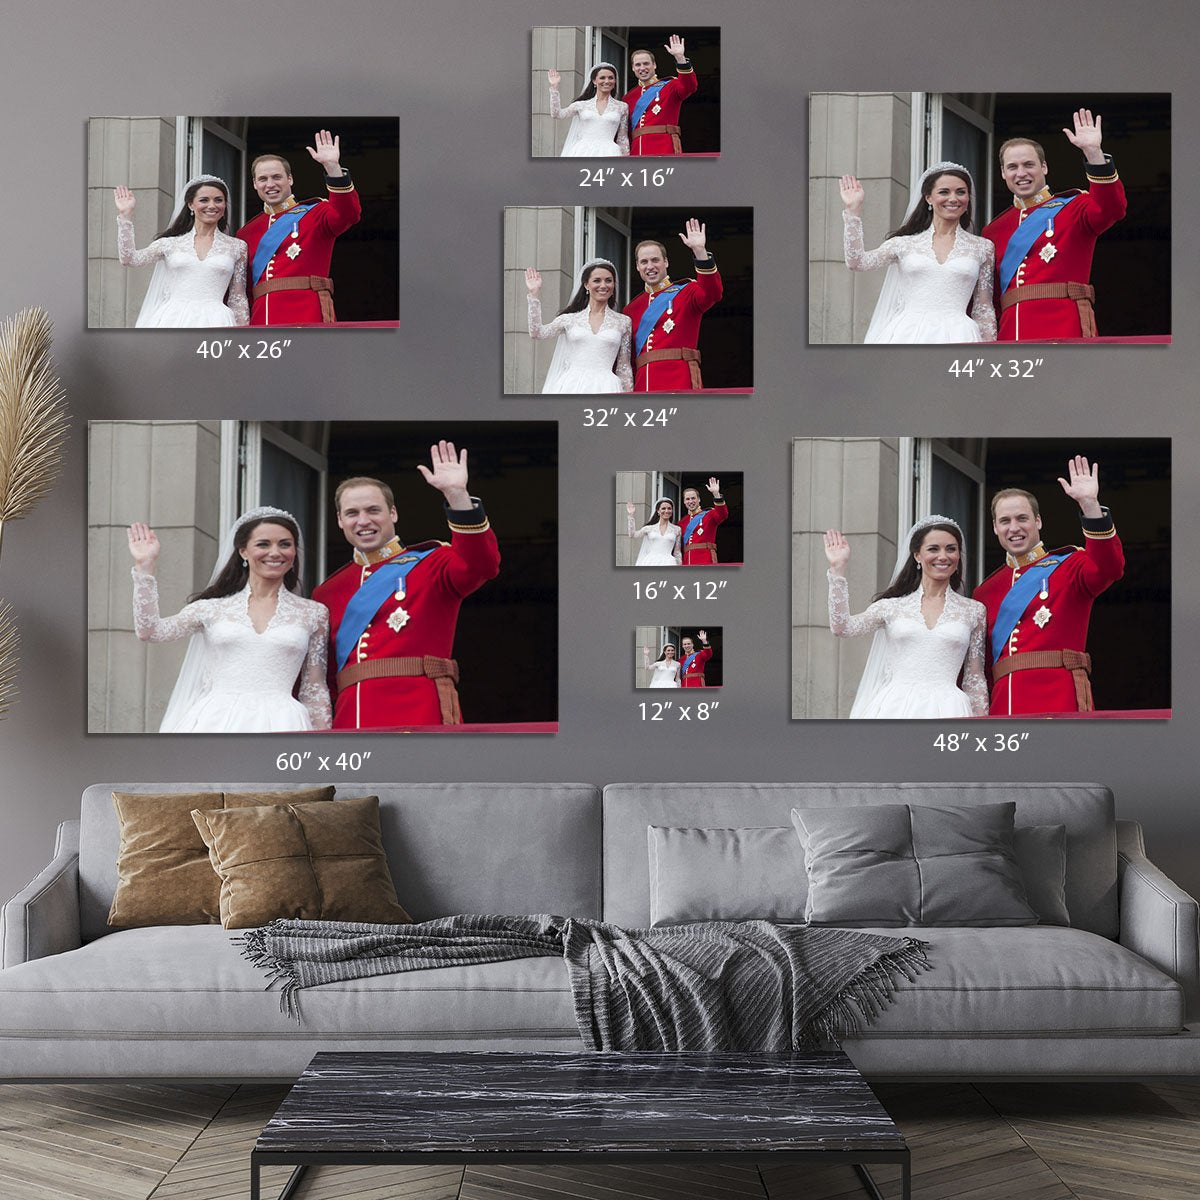 Prince William and Kate waving on their wedding day Canvas Print or Poster